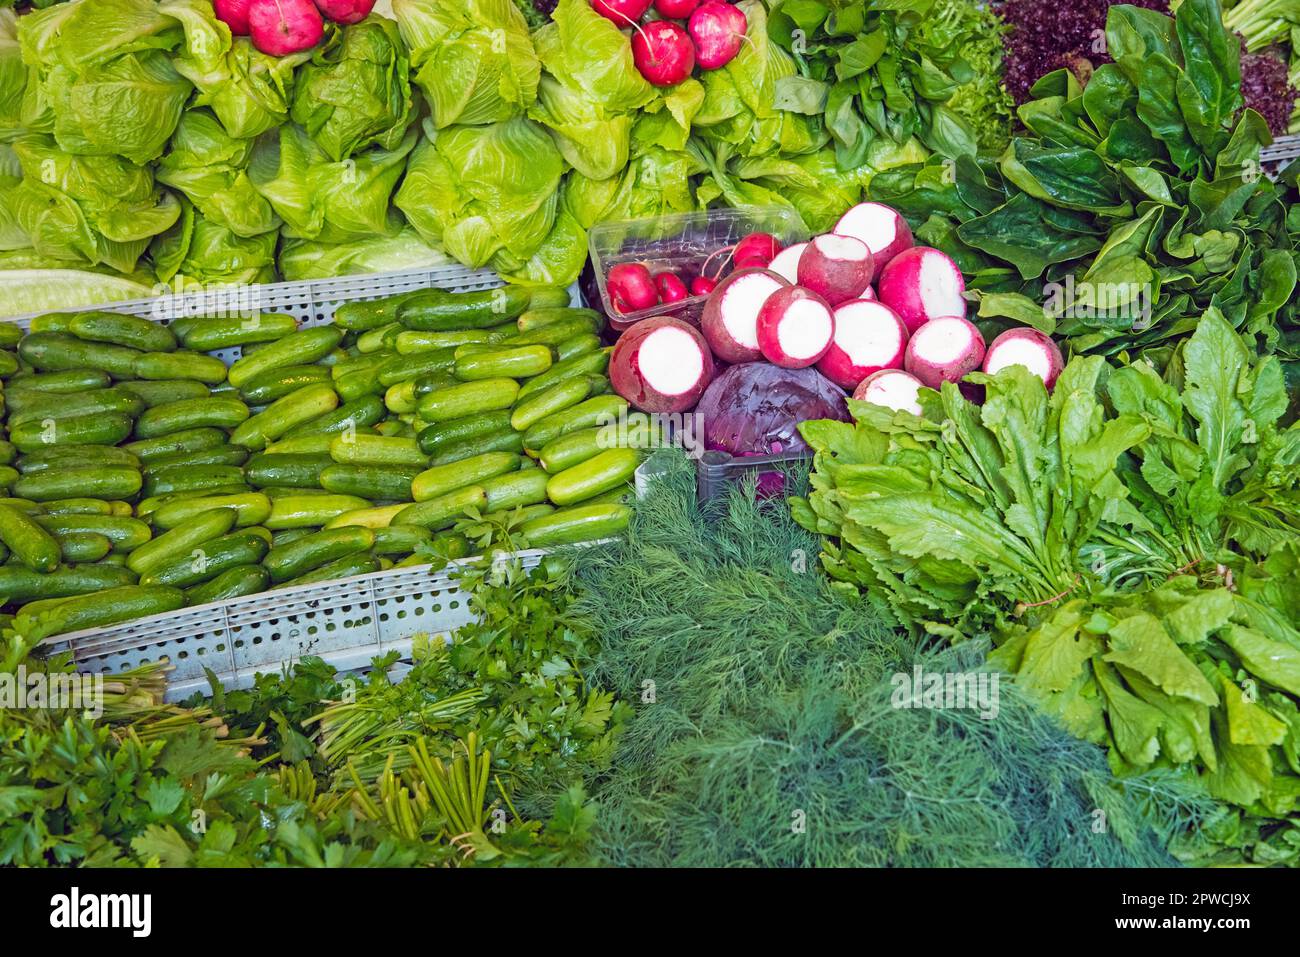 Herbs and salad for sale at a market Stock Photo